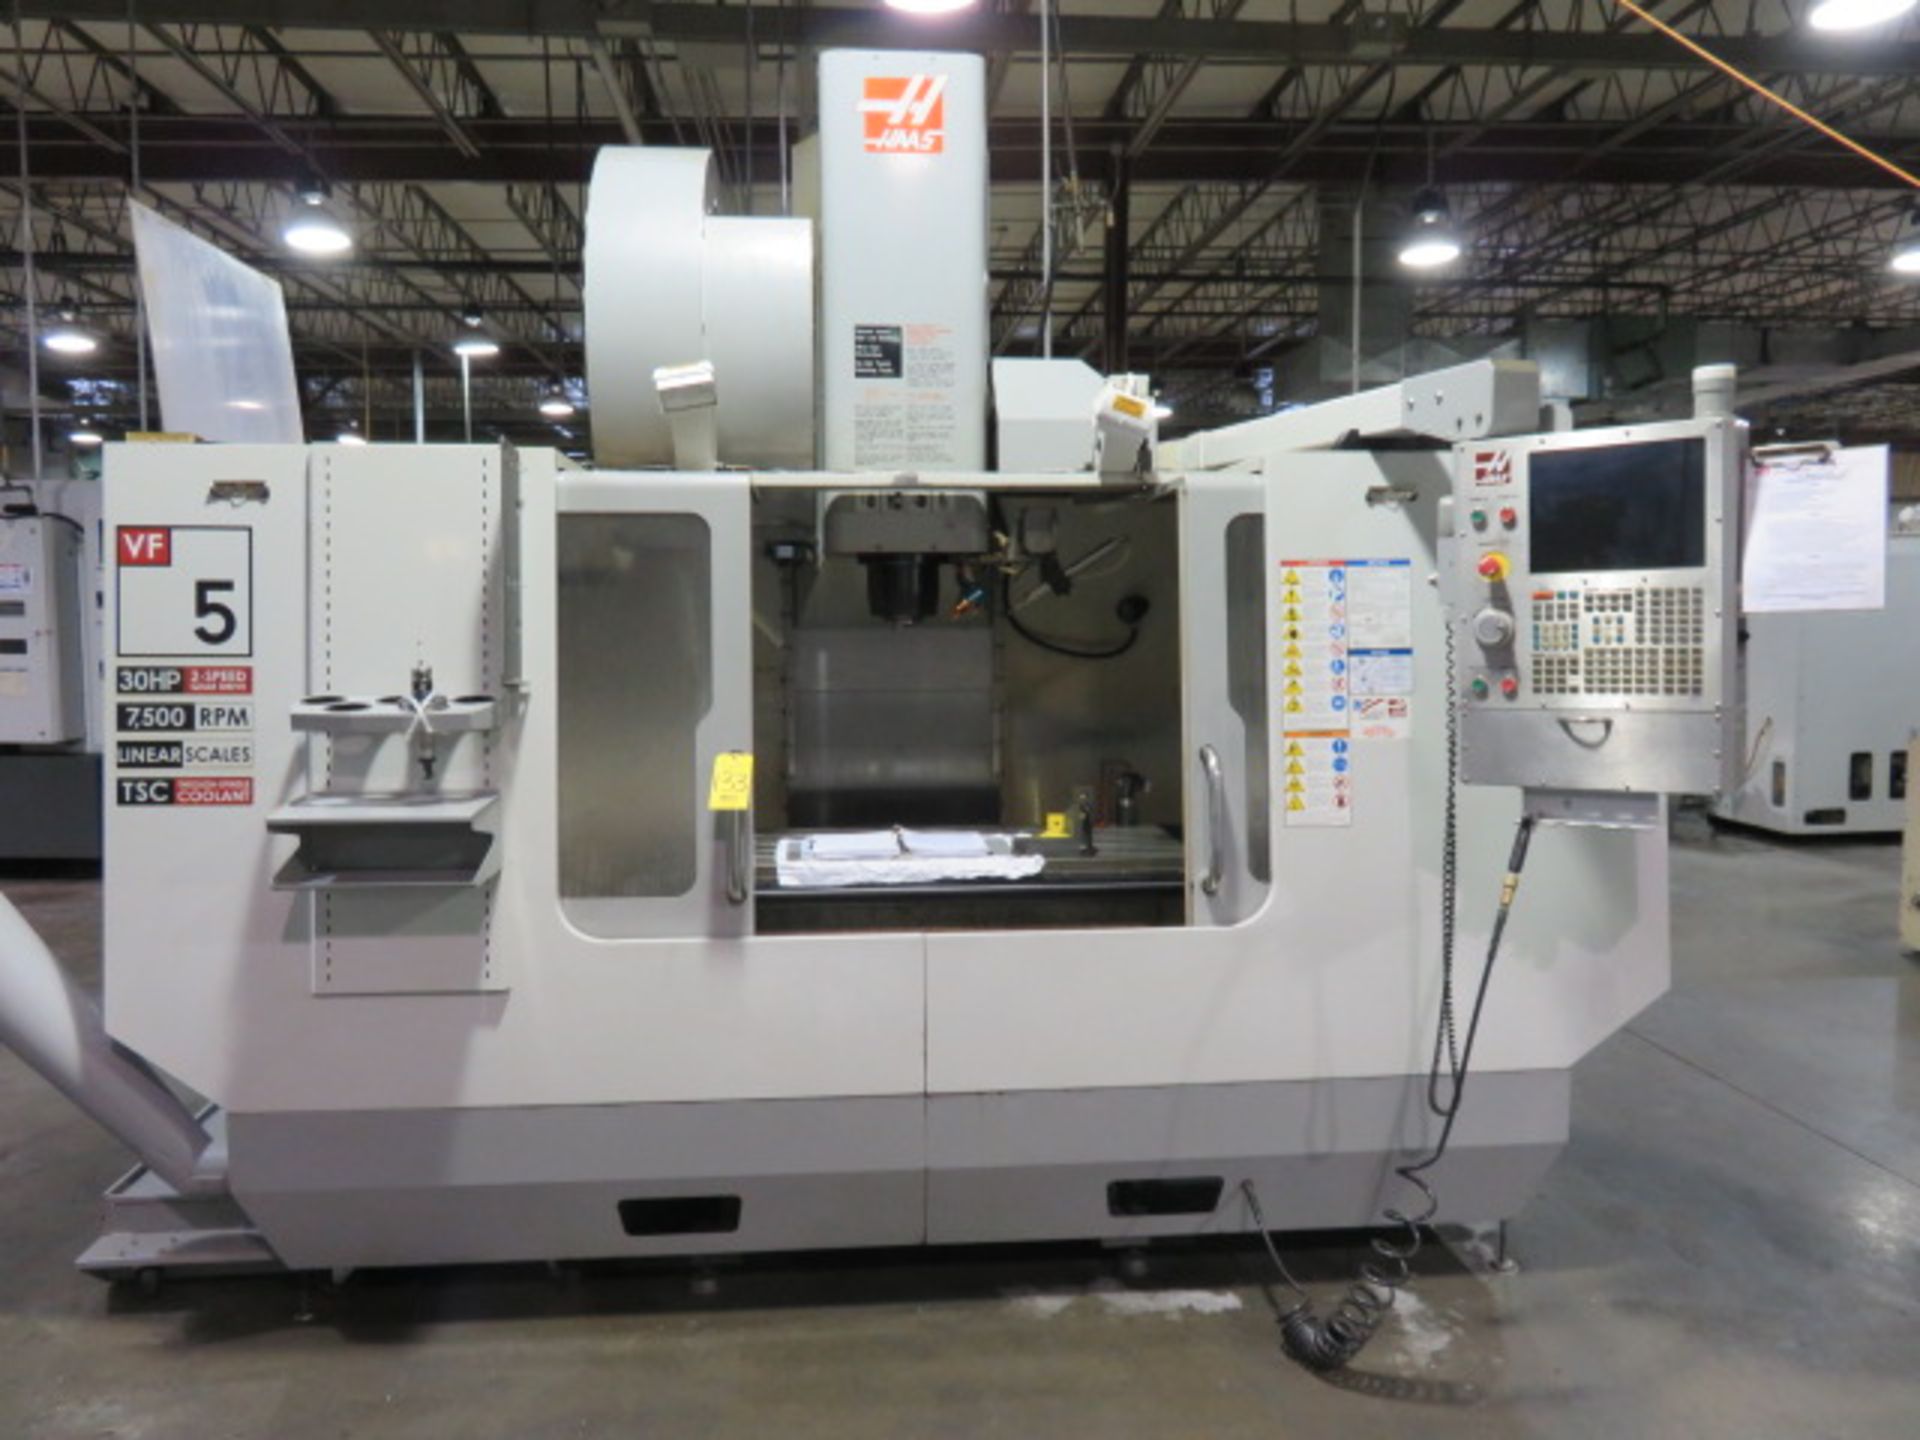 2007 HAAS VF-5/50 CNC VERTICAL MACHINING CENTER, S/N 1062010, 12,618 HOURS, (NEW SPNDL. 2012)